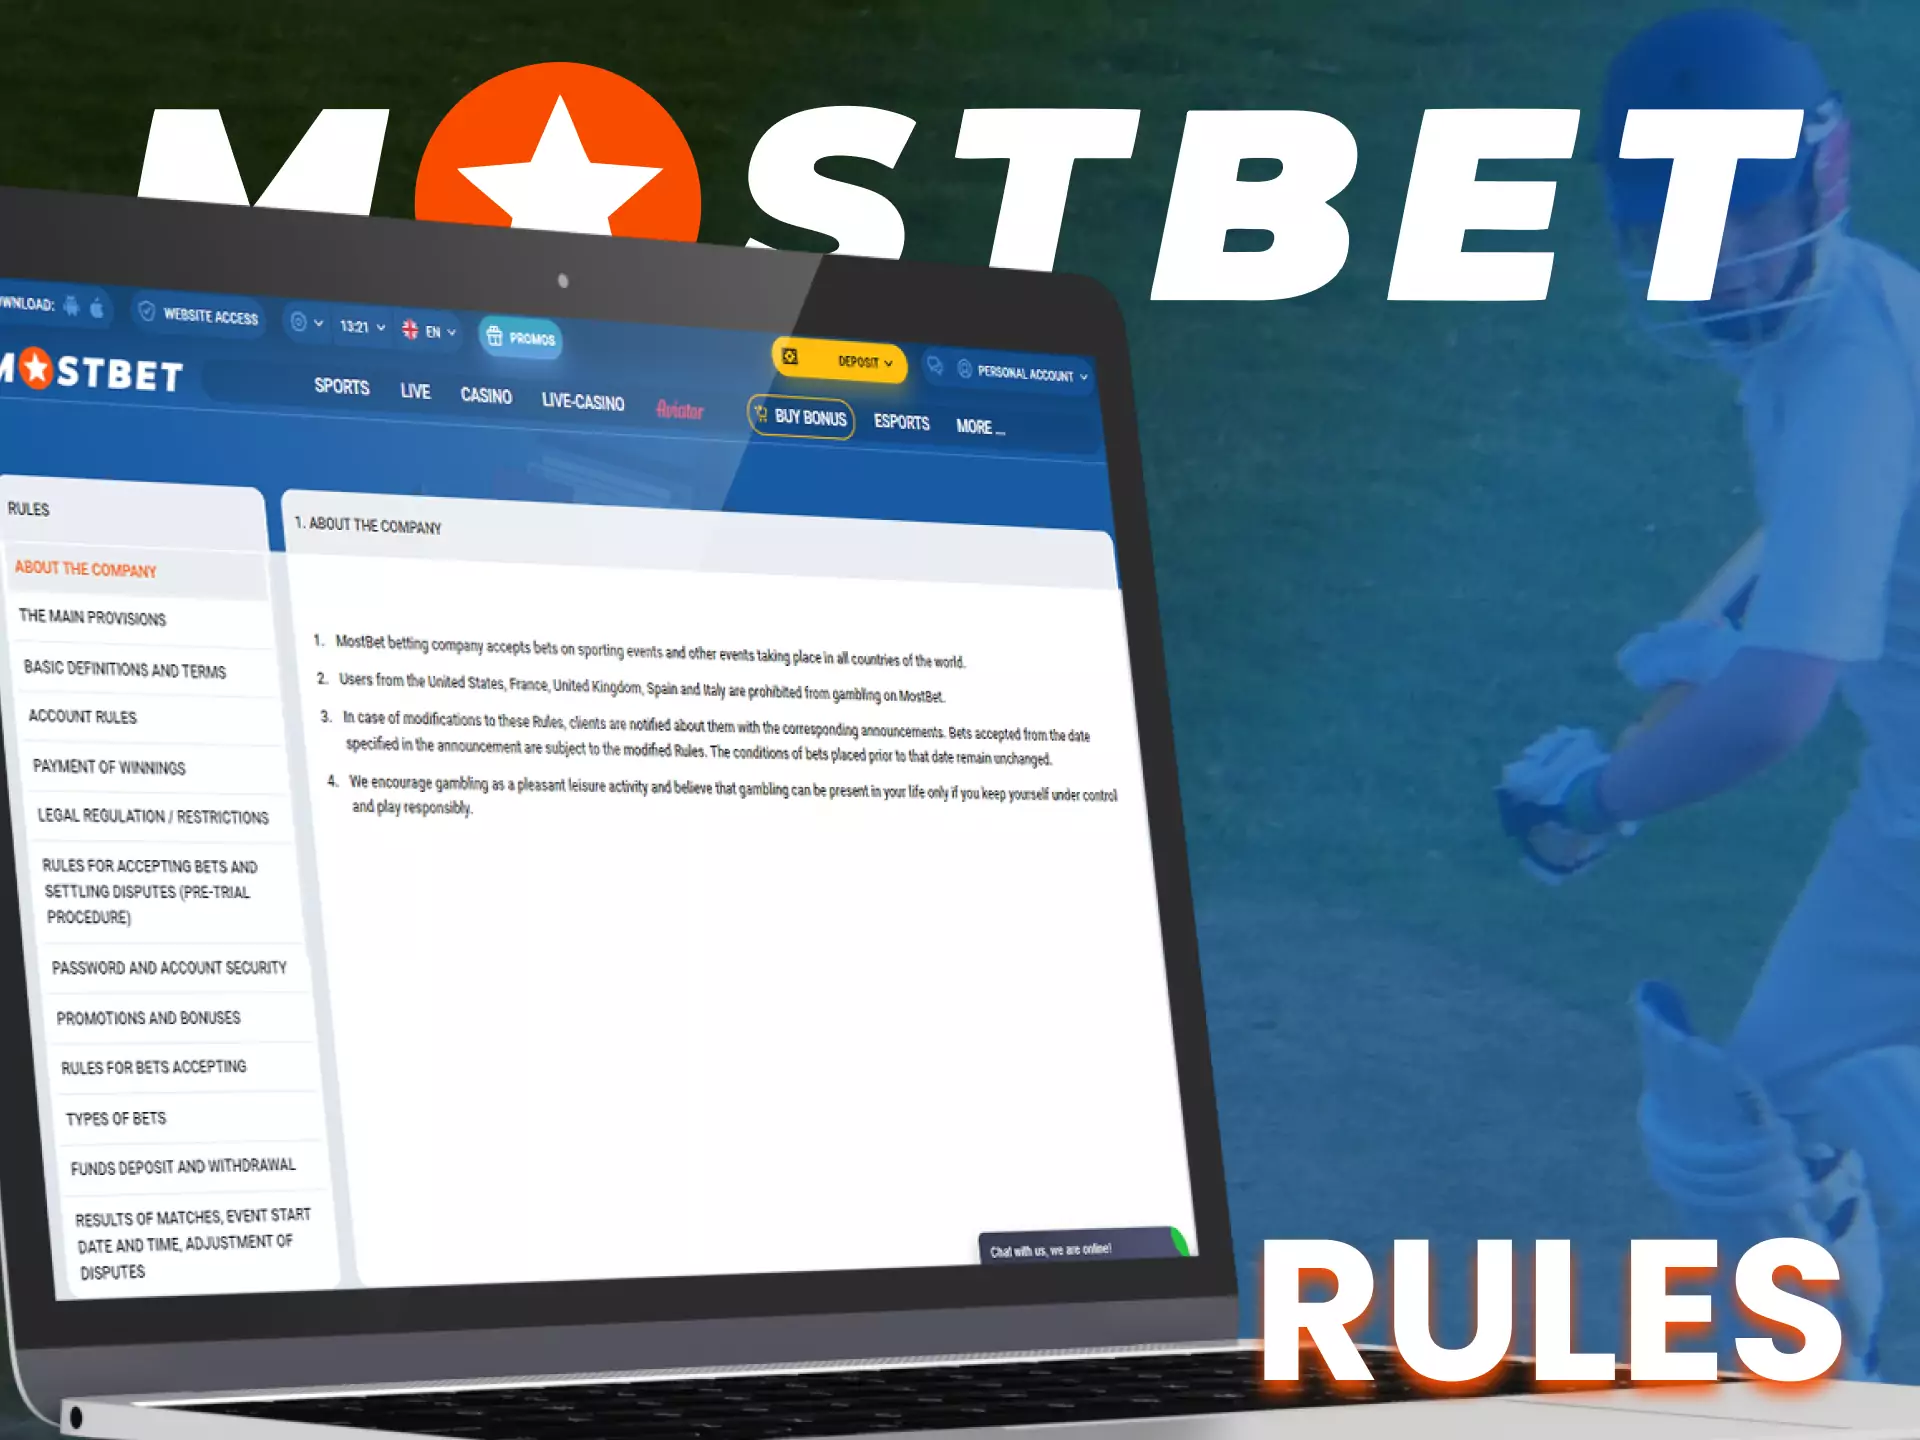 Learn the simple rules of Mostbet.